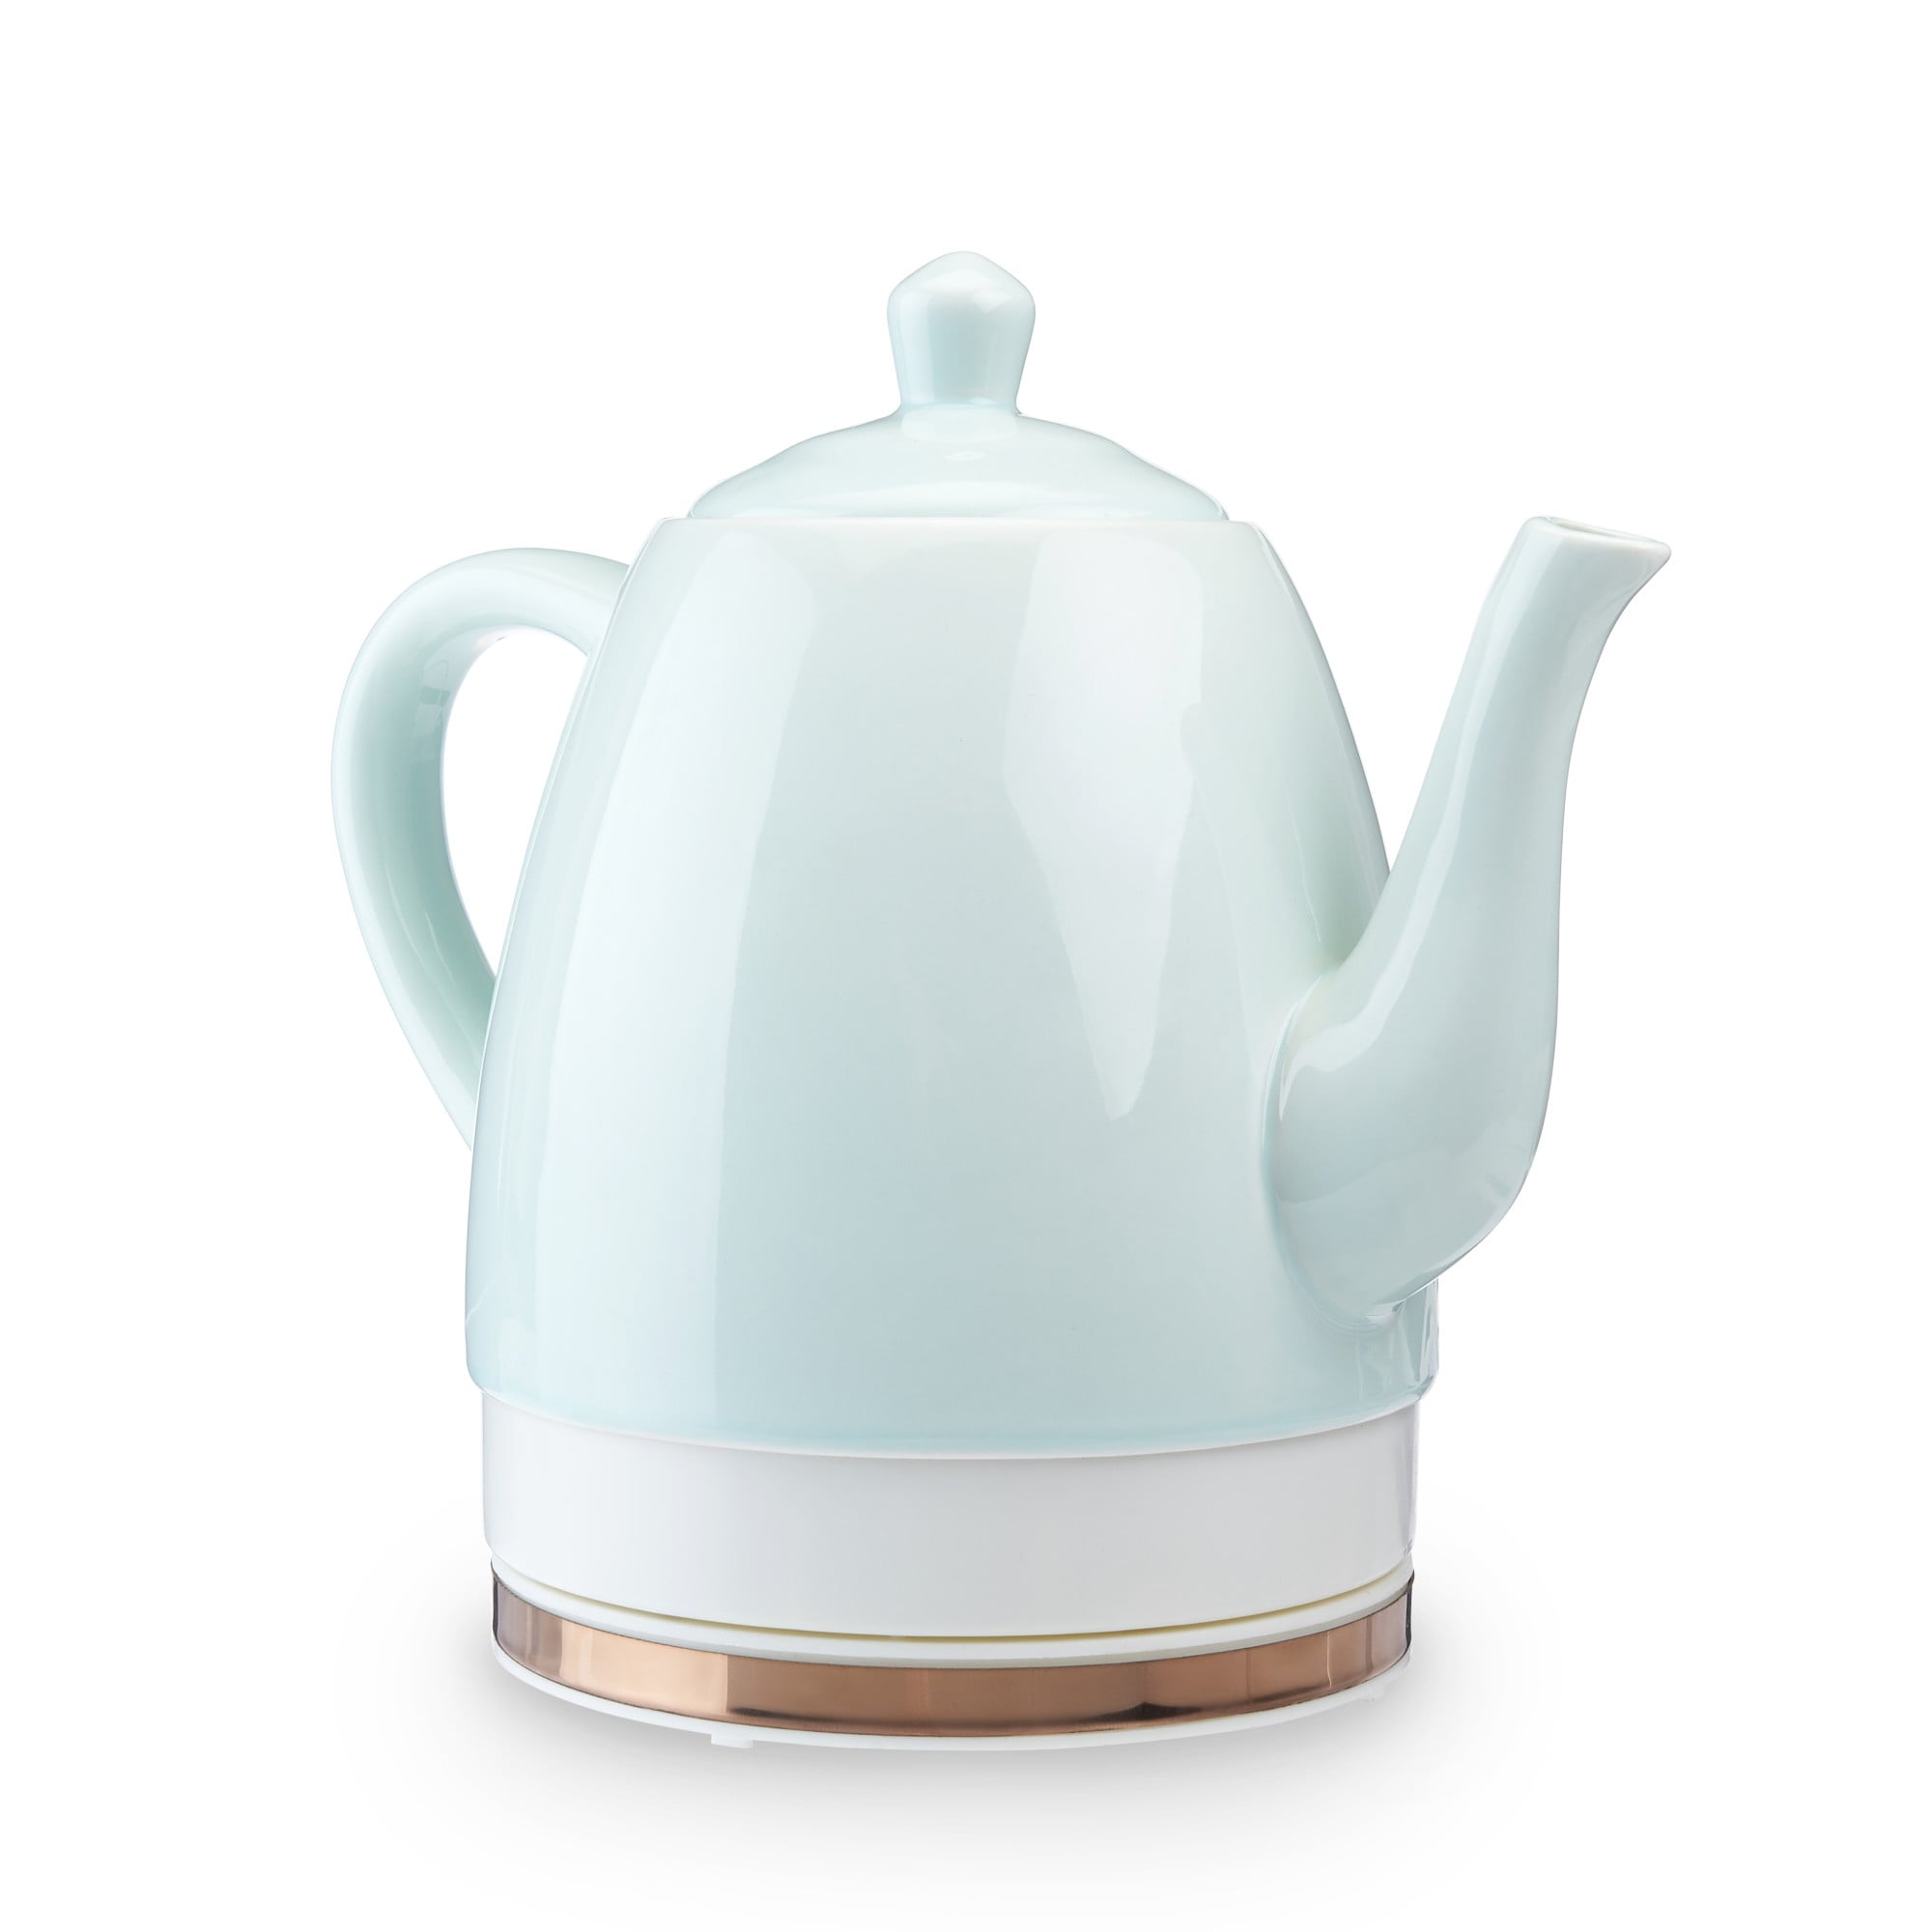 https://ak1.ostkcdn.com/images/products/is/images/direct/7148a1961486173e69a0508ef98e65b74bc03947/Noelle-Ceramic-Electric-Tea-Kettle-by-Pinky-Up.jpg